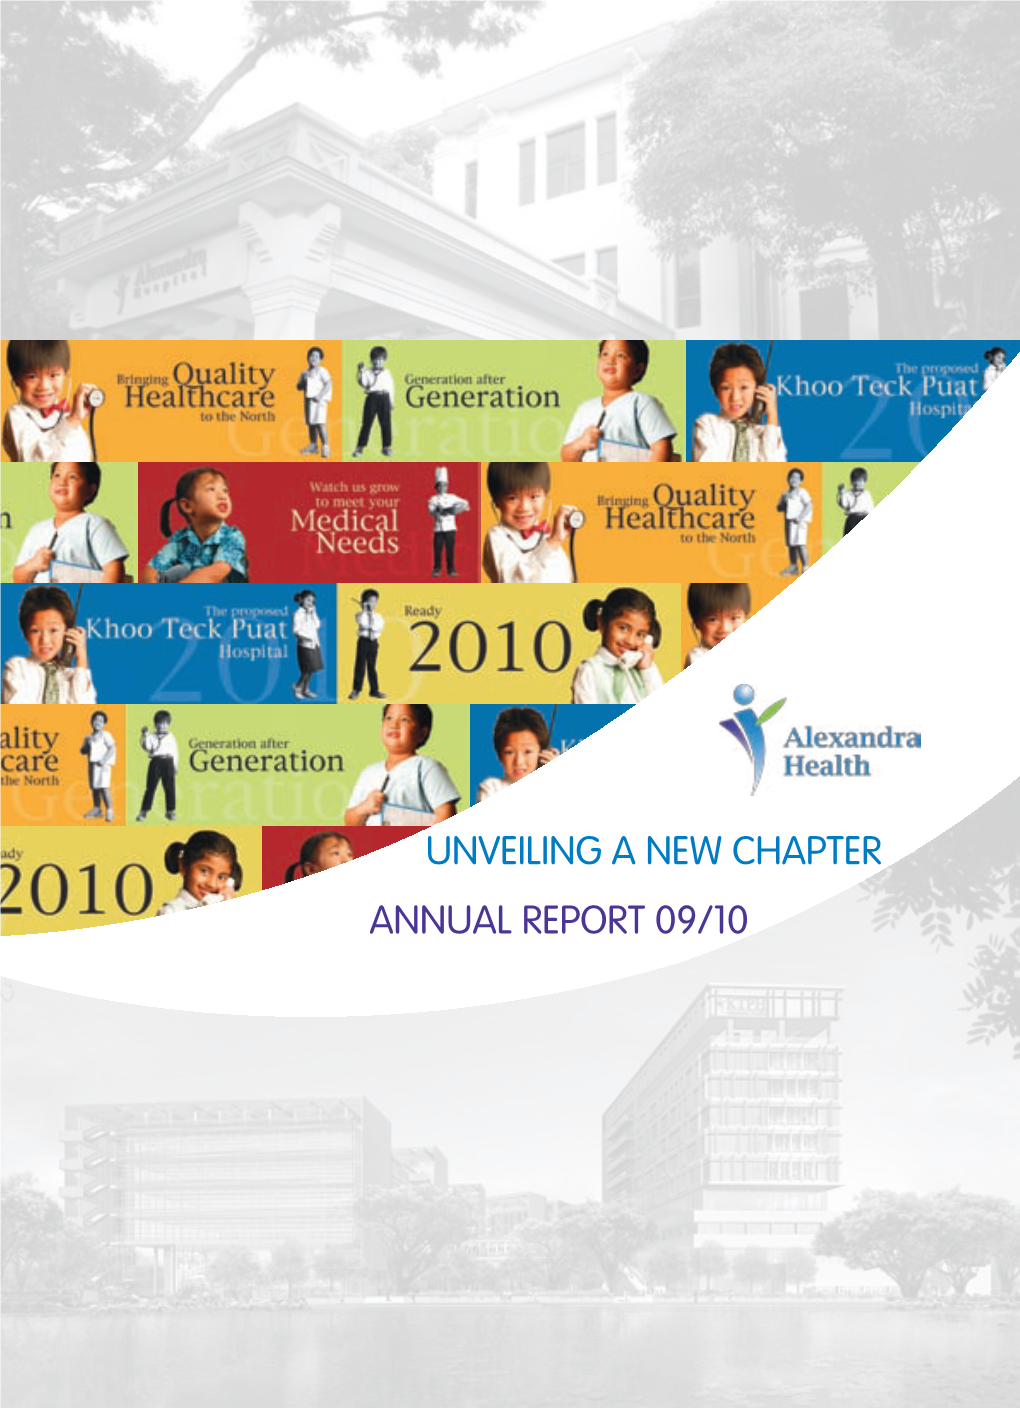 Unveiling a New Chapter Annual Report 09/10 Contents